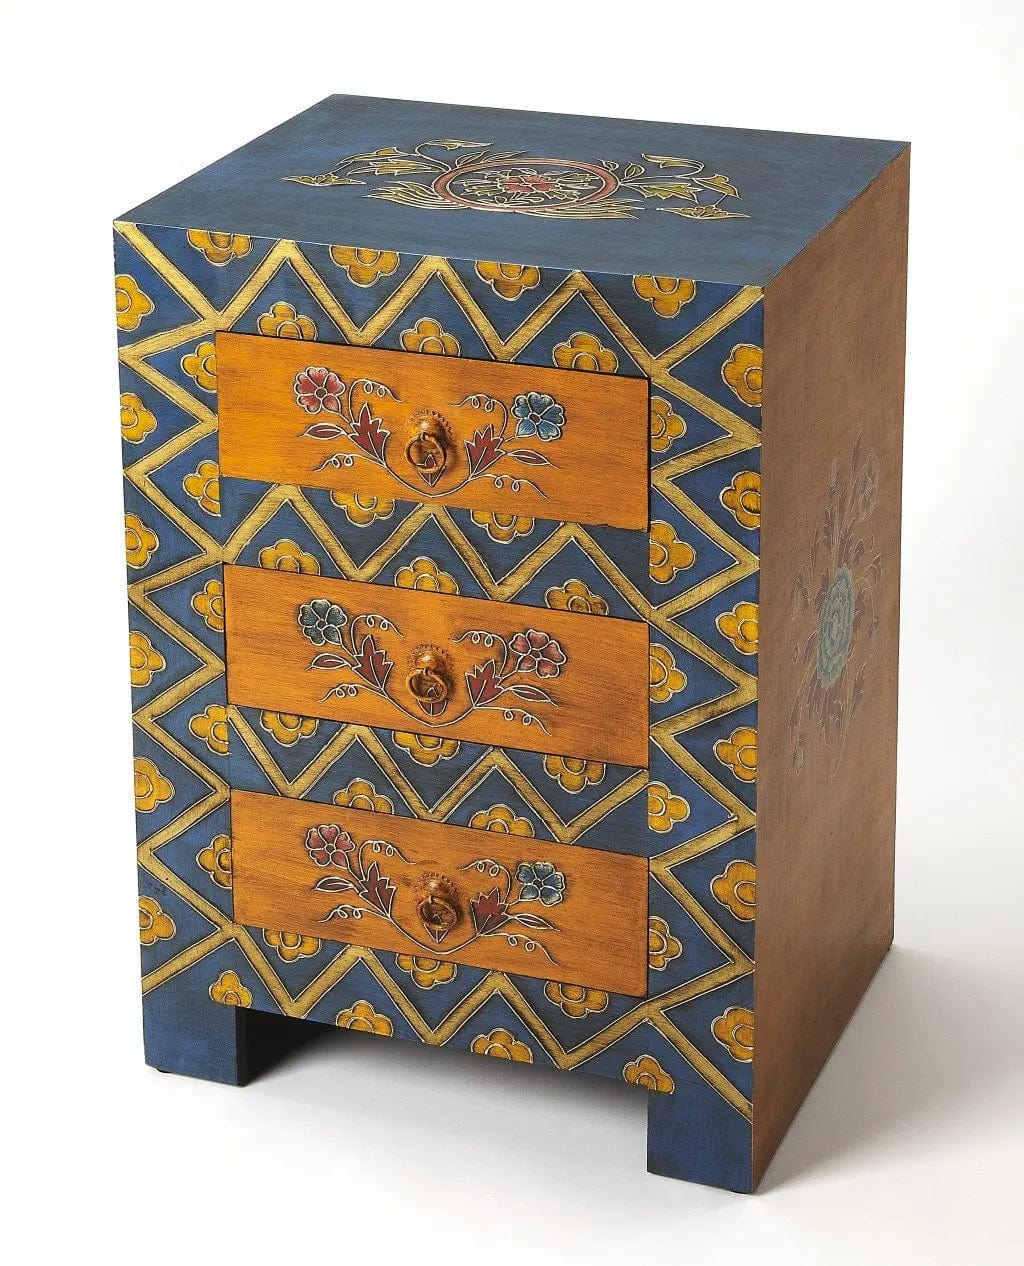 Exotic Hand Painted 3 Drawer Accent Chest Furniture 871.44 MPGD Corp Merchandise